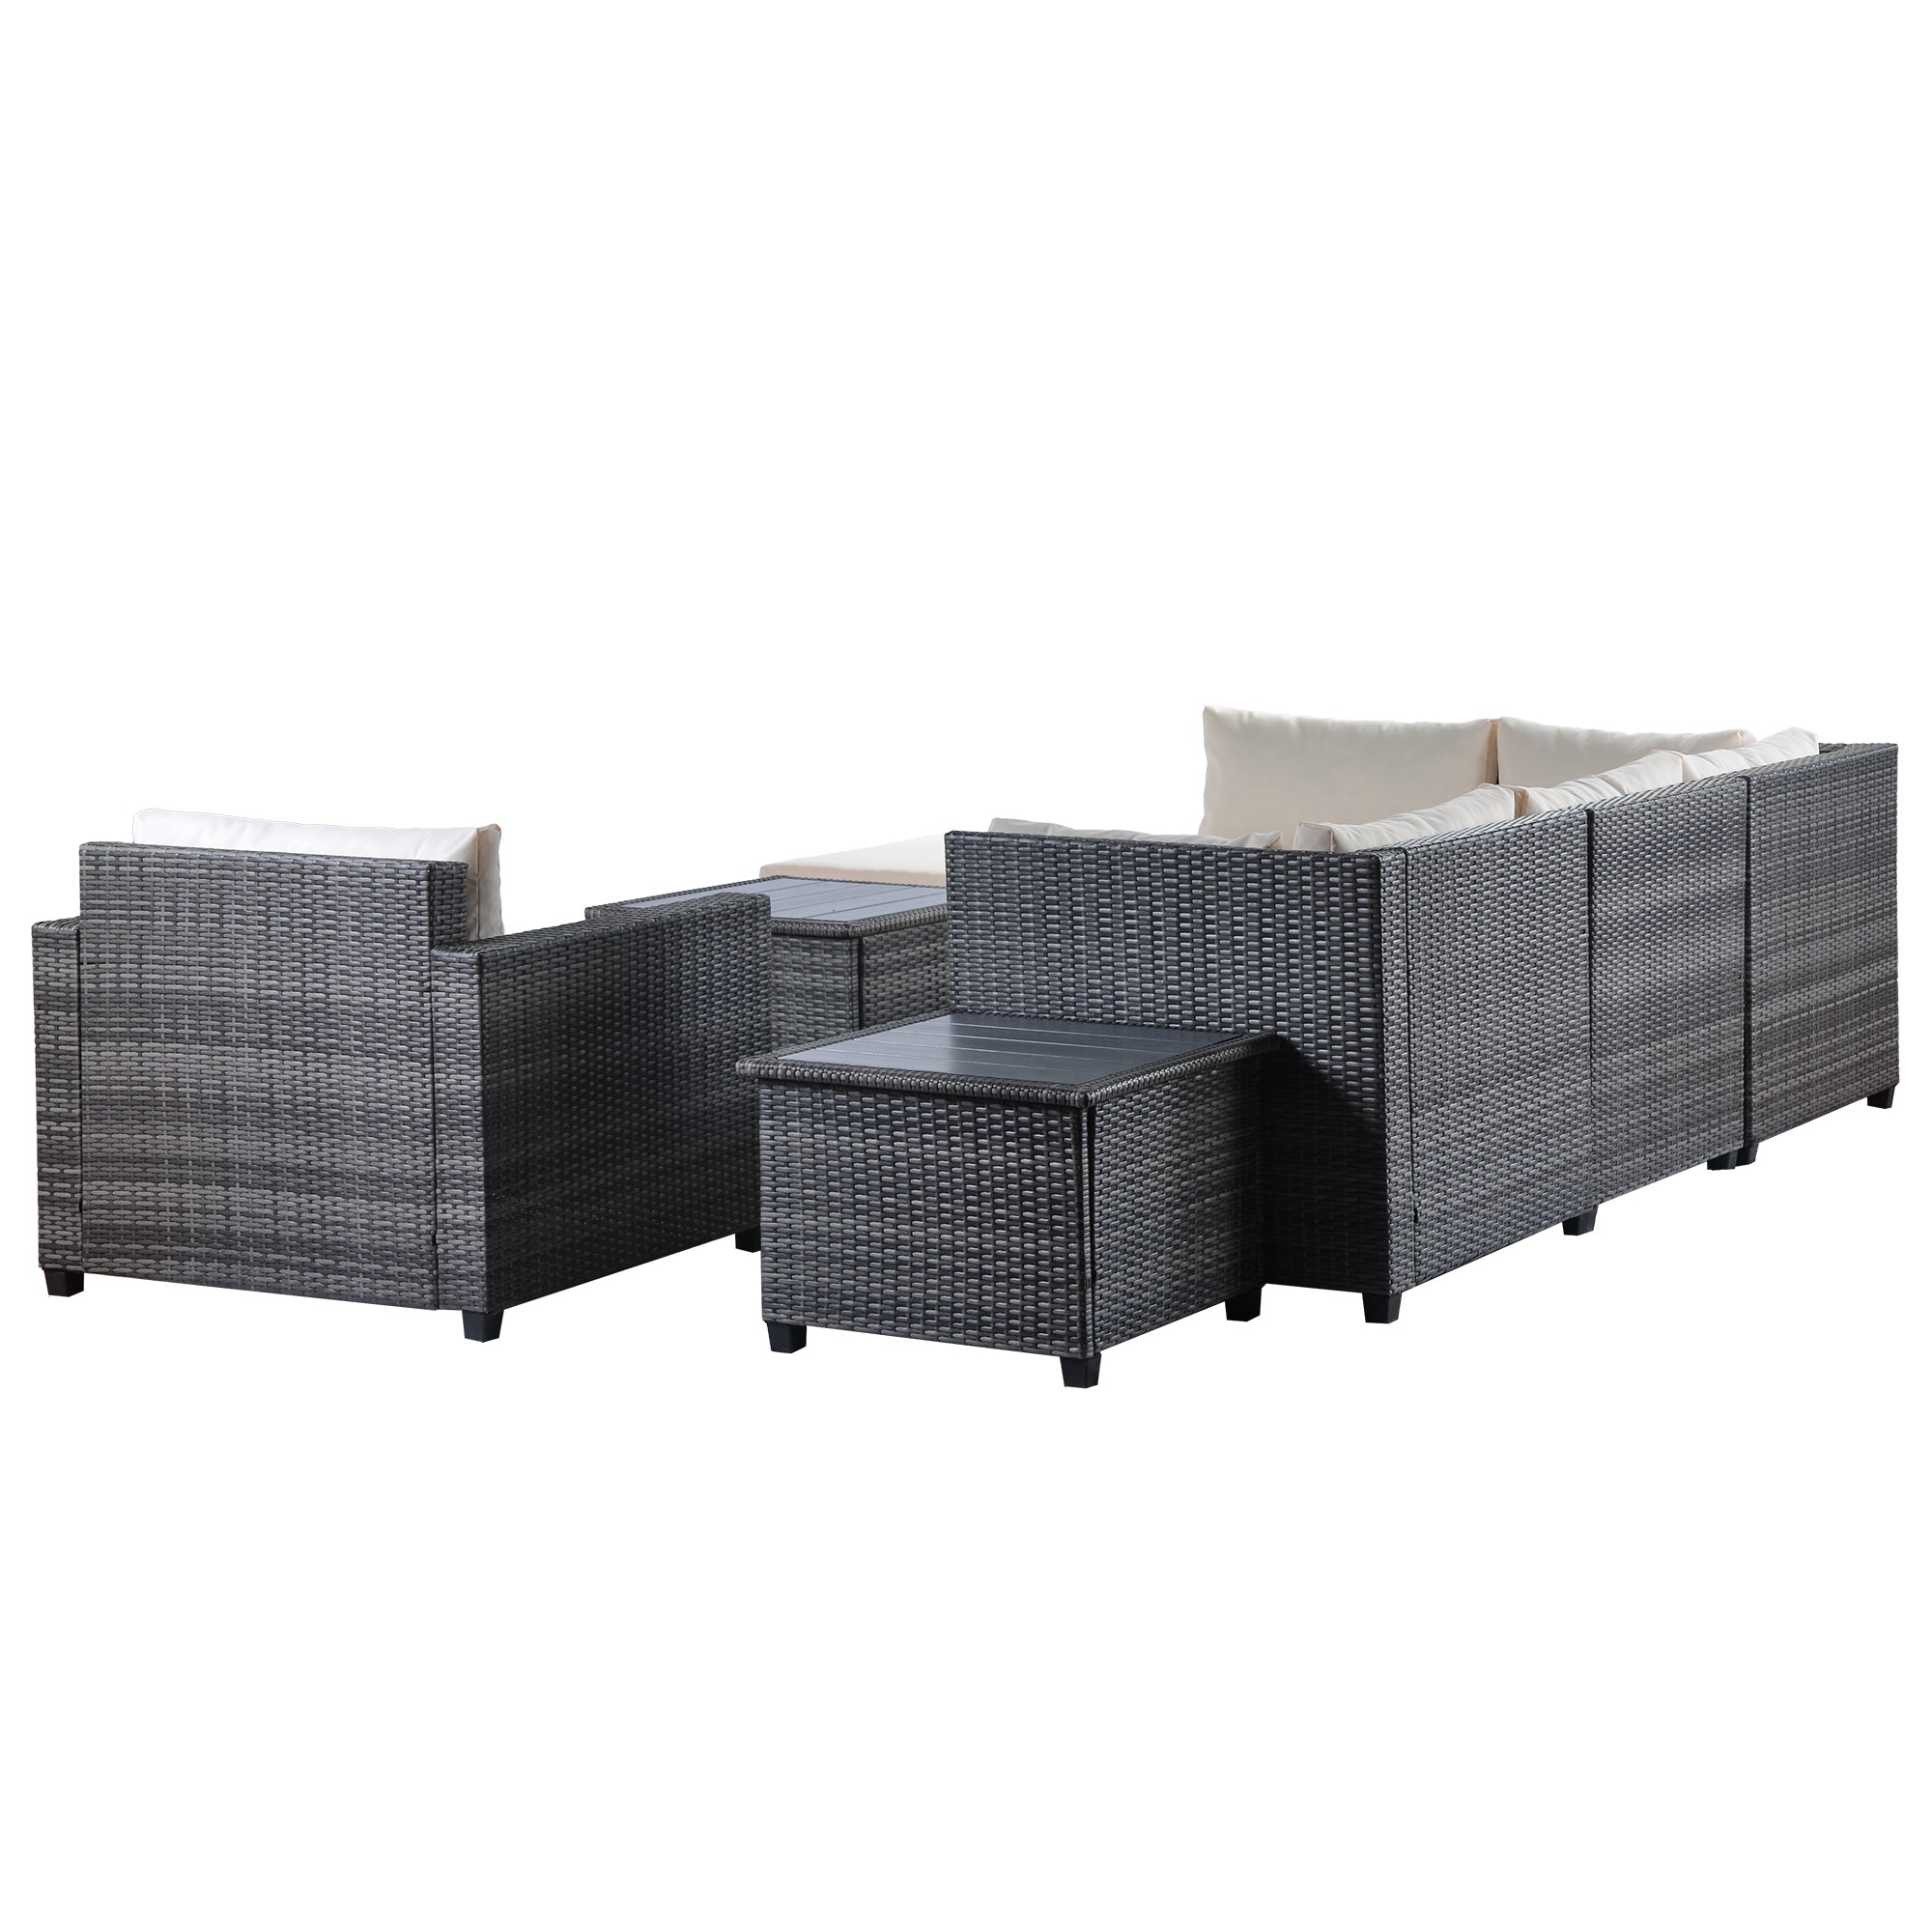 U Style 8 Piece Rattan Sectional Seating Group with beige-rattan